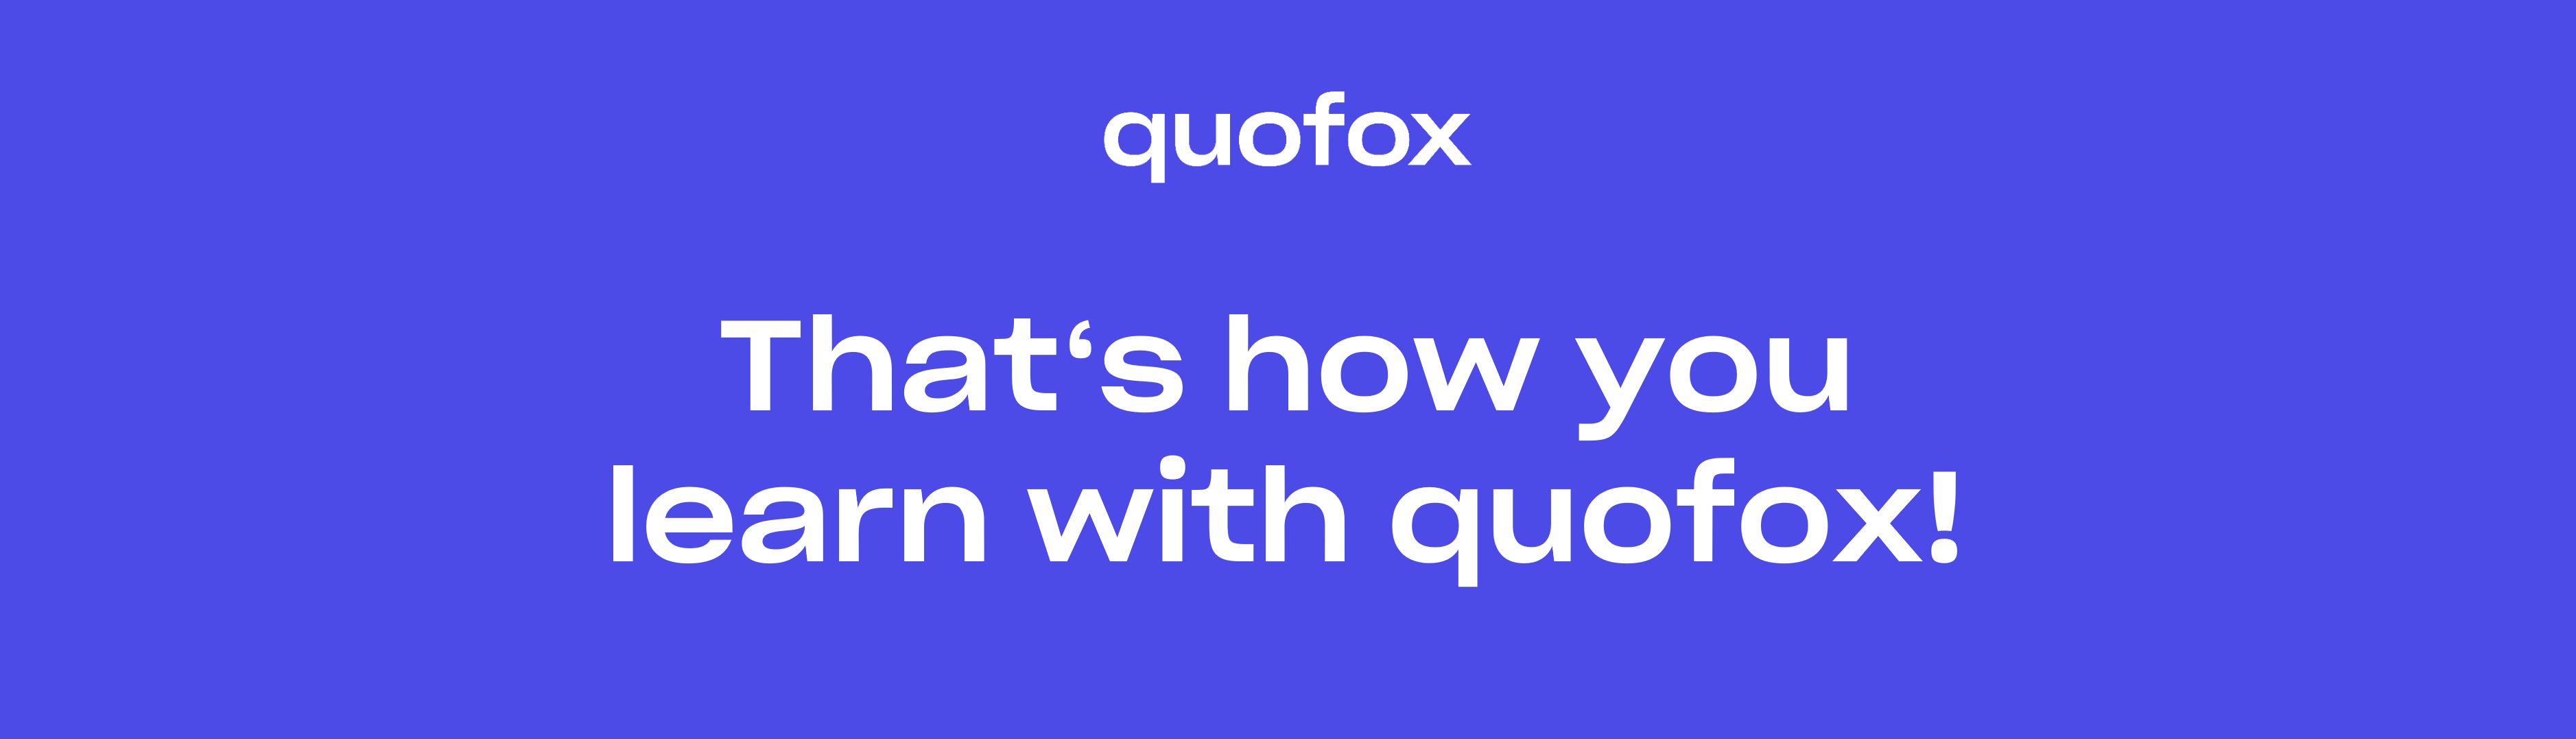 Review quofox Learning Suite: Learning platform and learning content from a single source - Appvizer